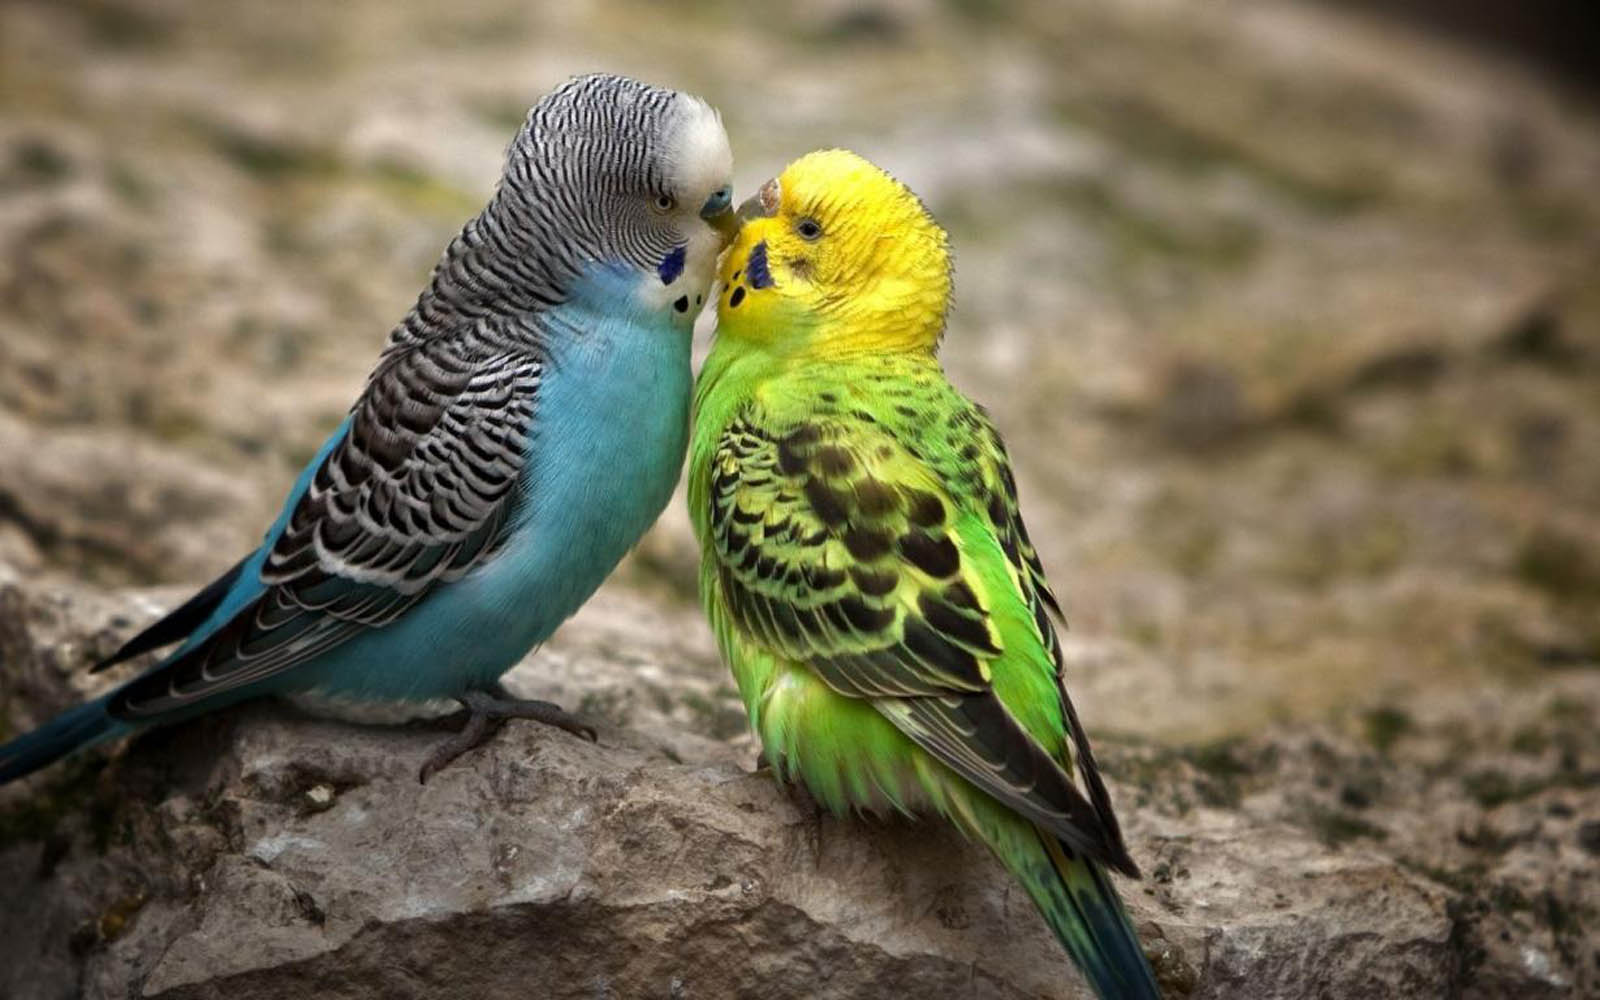 Tag Love Birds Desktop Wallpapers Backgrounds PhotosImages and 1600x1000